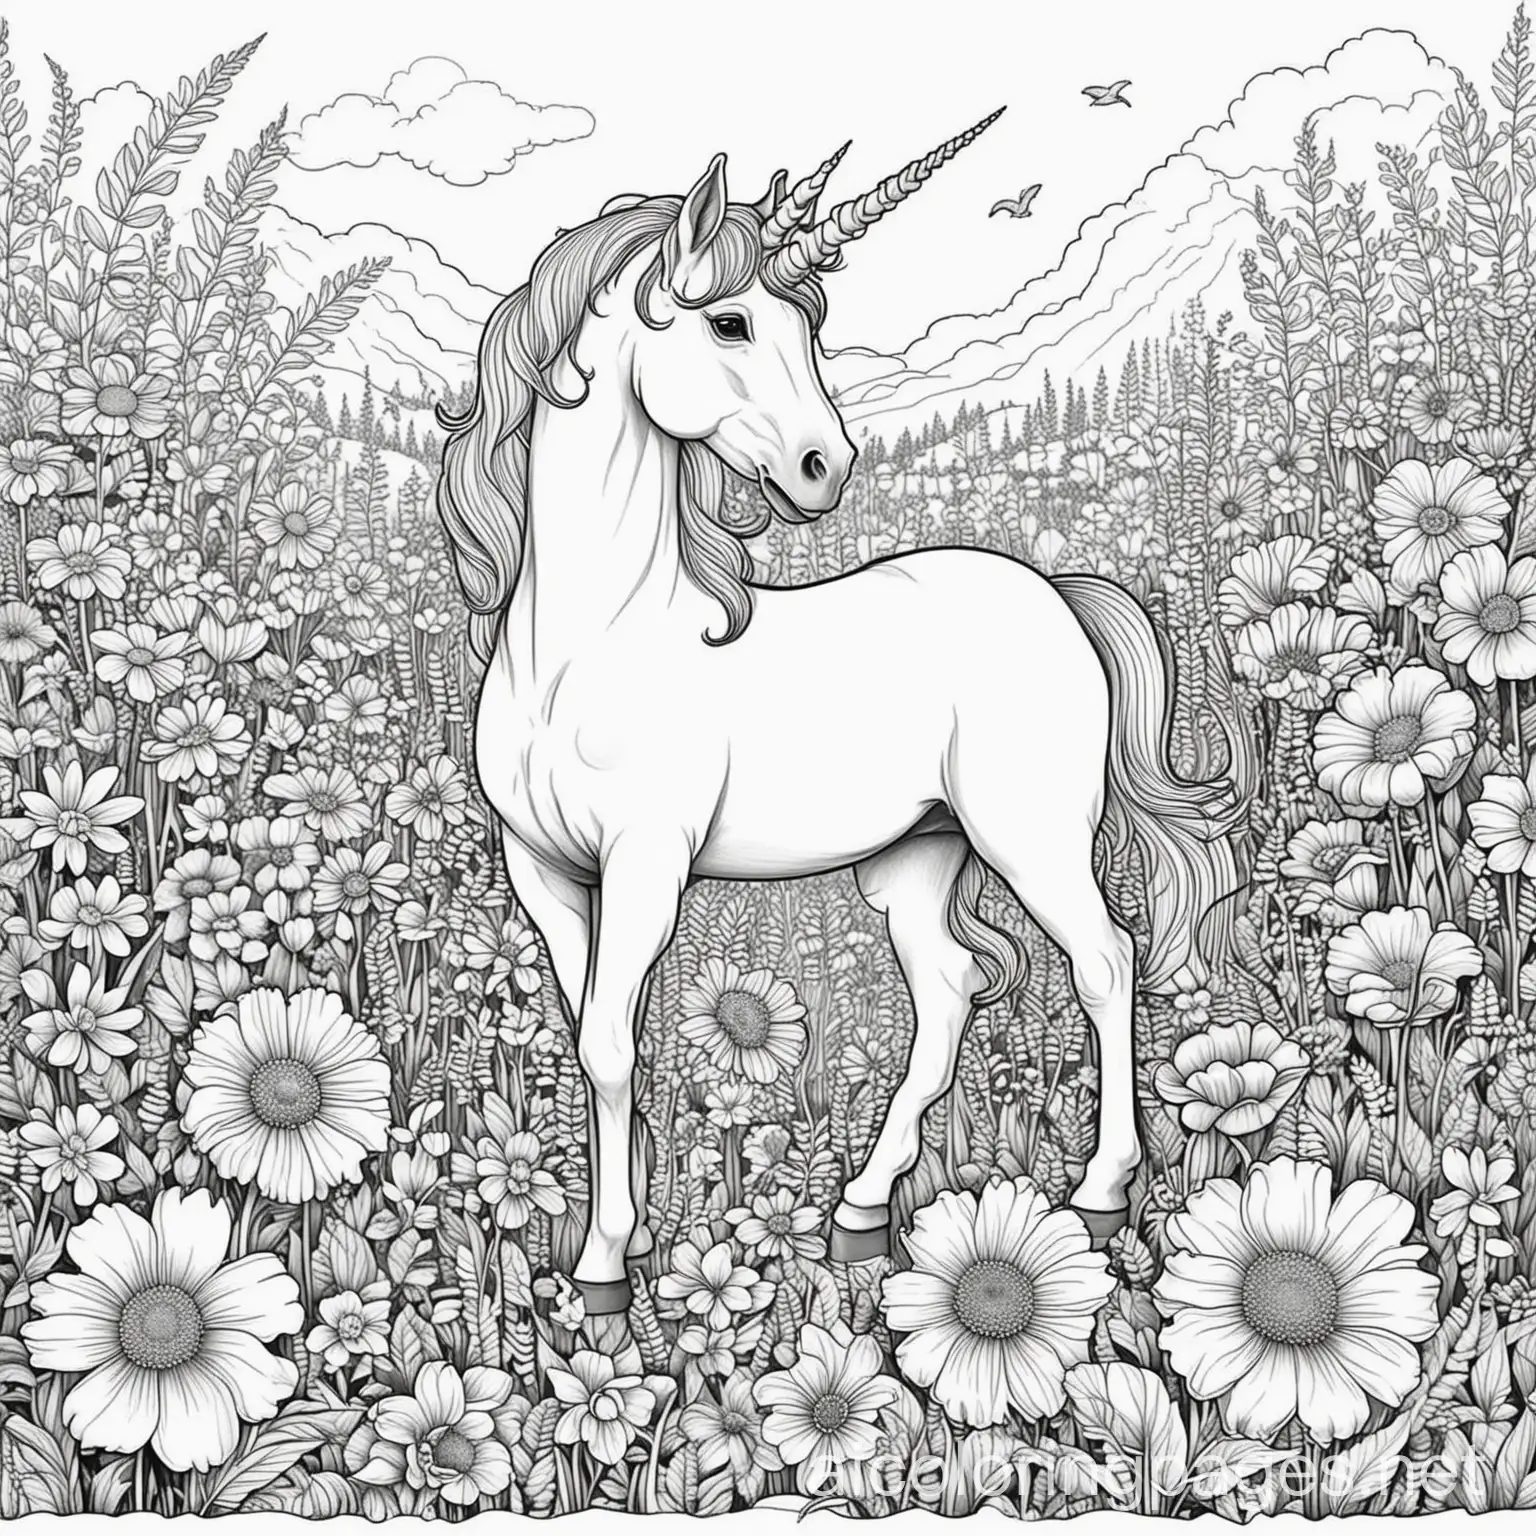 Unicorn in a Field of big Flowers: , Coloring page, Coloring Page, black and white, line art, white background, Simplicity, Ample White Space. The background of the coloring page is plain white to make it easy for young children to color within the lines. The outlines of all the subjects are easy to distinguish, making it simple for kids to color without too much difficulty, Coloring Page, black and white, line art, white background, Simplicity, Ample White Space. The background of the coloring page is plain white to make it easy for young children to color within the lines. The outlines of all the subjects are easy to distinguish, making it simple for kids to color without too much difficulty